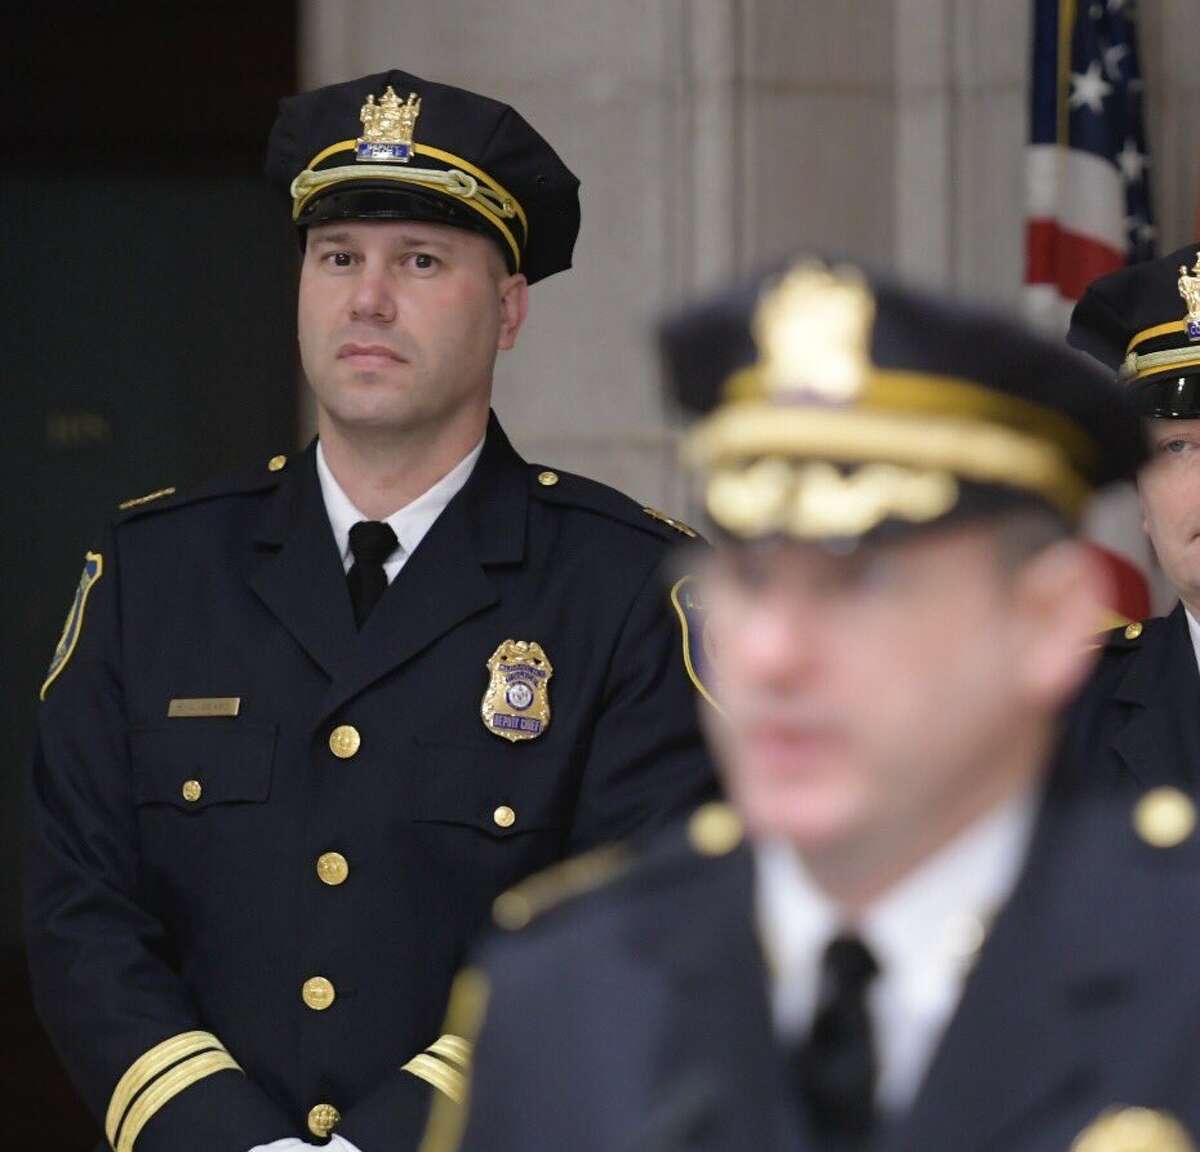 Deputy Albany Police Chief Robert Sears looks on as Police Chief Brendan Cox announces his retirement from the police department. Sears will take on day-to-day leadership of the department but Mayor Kathy Sheehan says she intends to mount a nationwide search for the next police chief. (Skip Dickstein / Times Union)